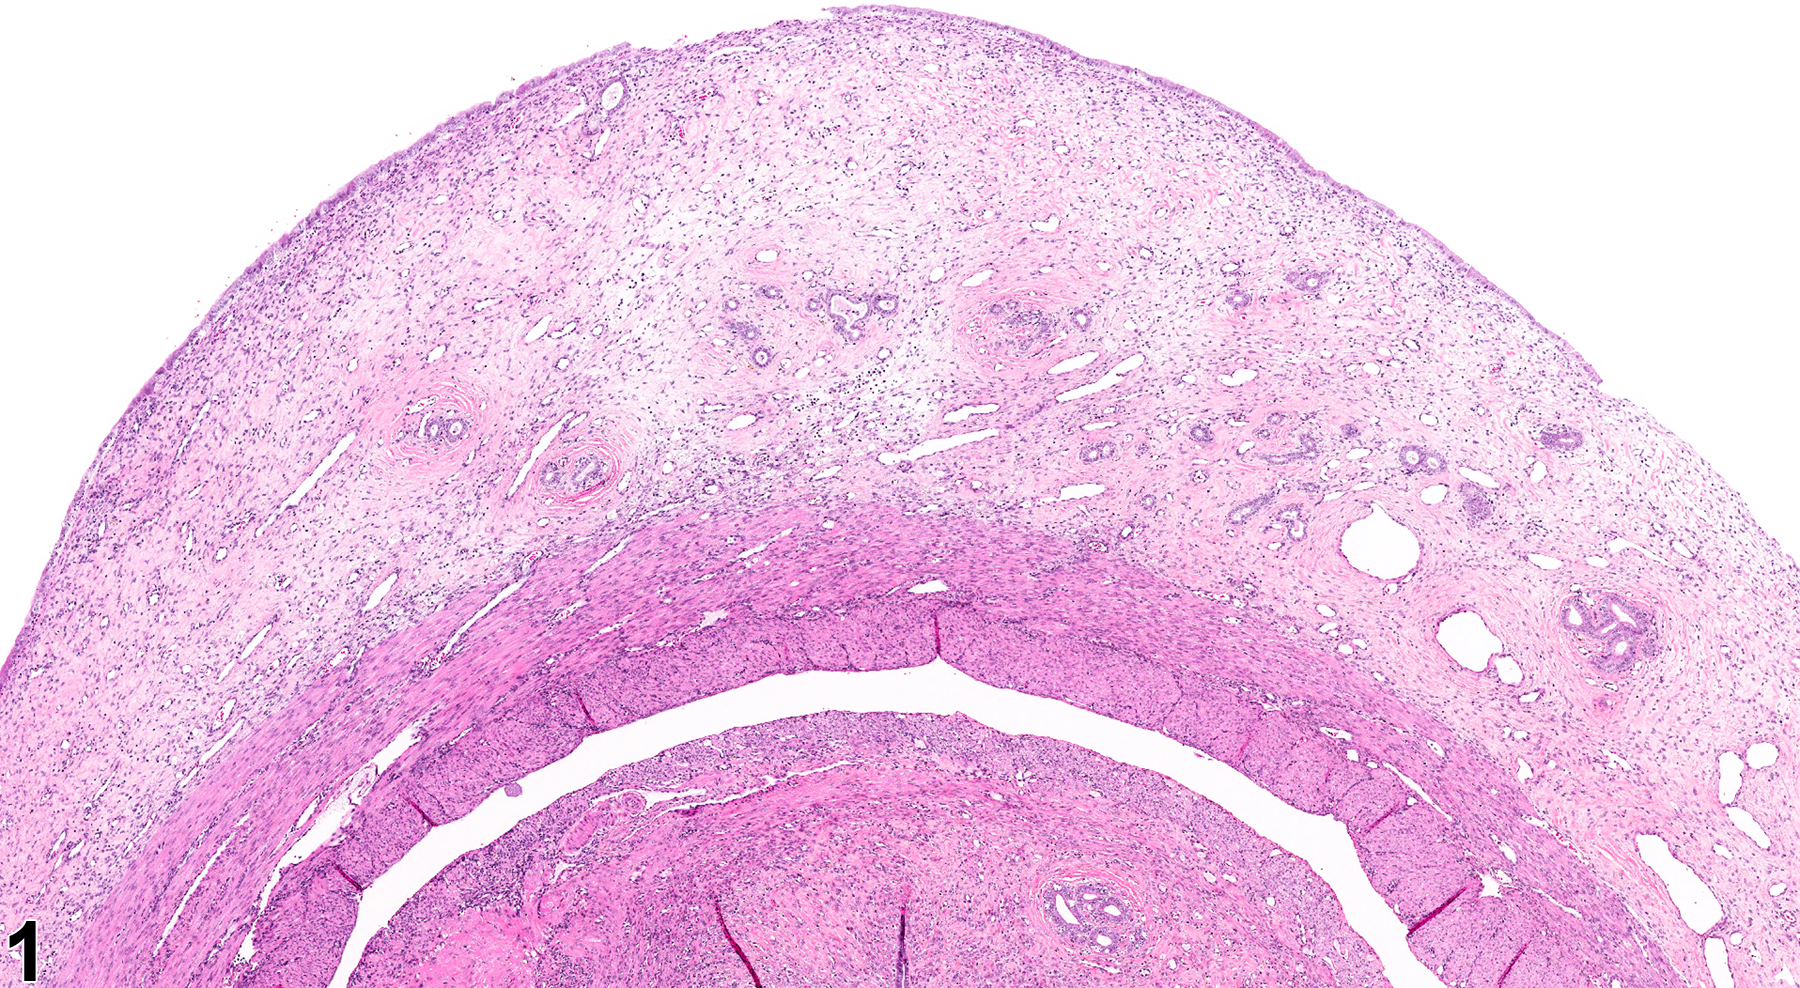 Image of edema in the uterus from a female F344/N rat in a chronic study